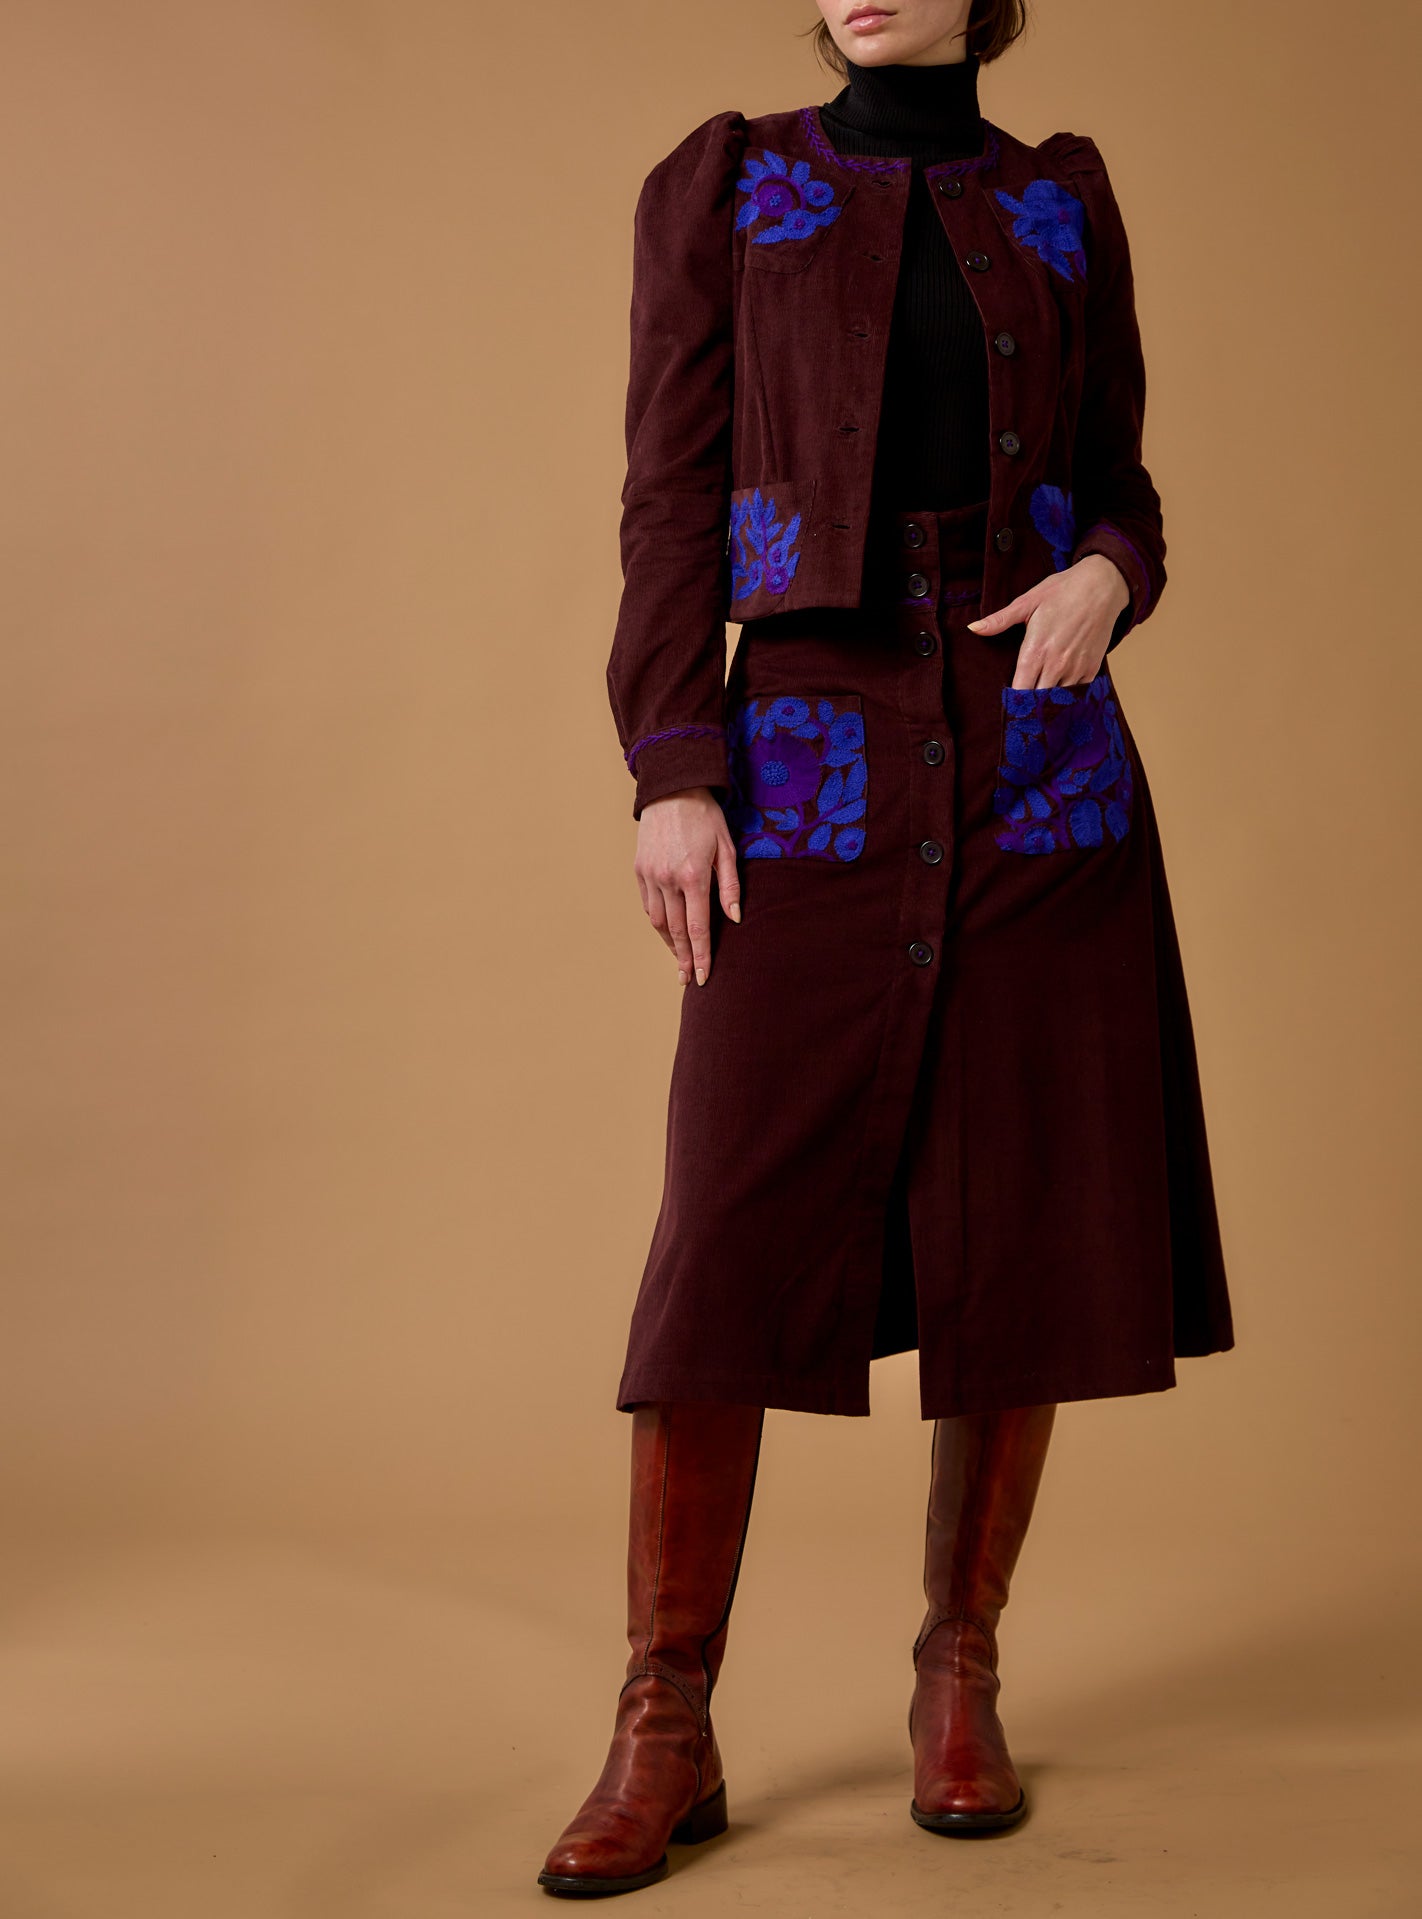 Large view of Yardley Chocolate/Cobalt & Purple Skirt with Arabella Jacket - Embroidered Corduroy by Thierry Colson